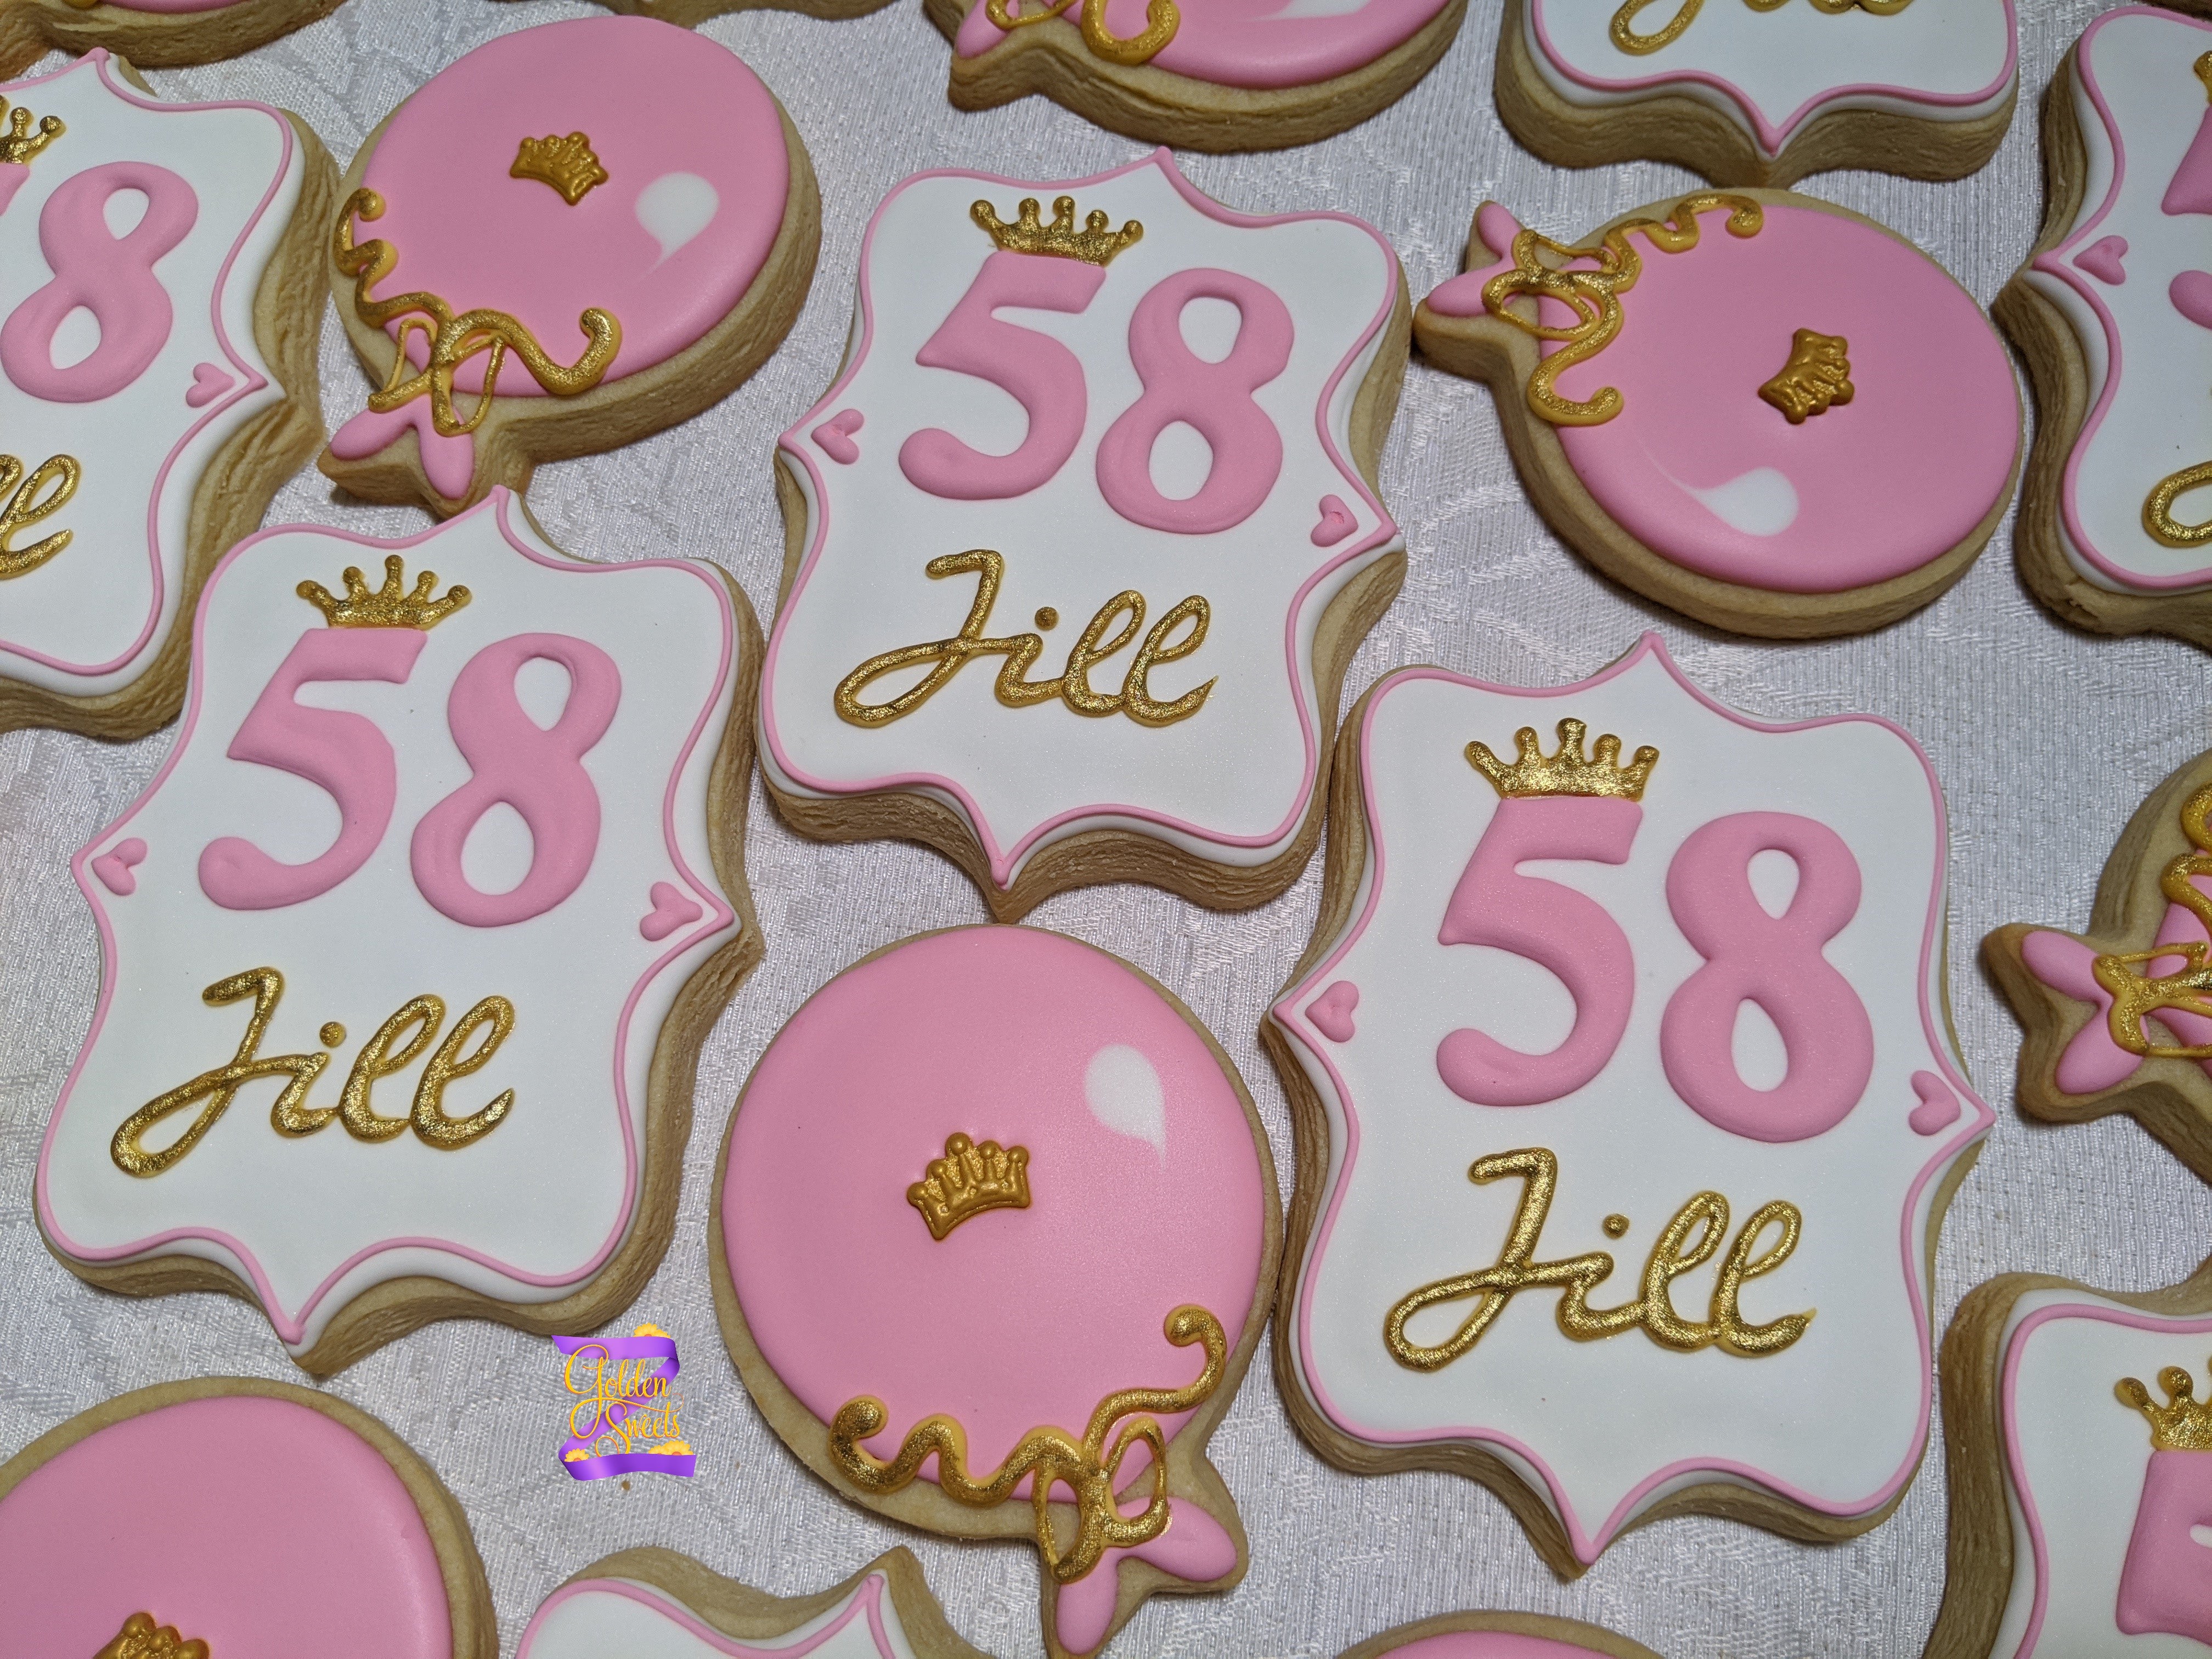 24 Happy 58th Birthday Princess or Personalized for Any Age Cookies